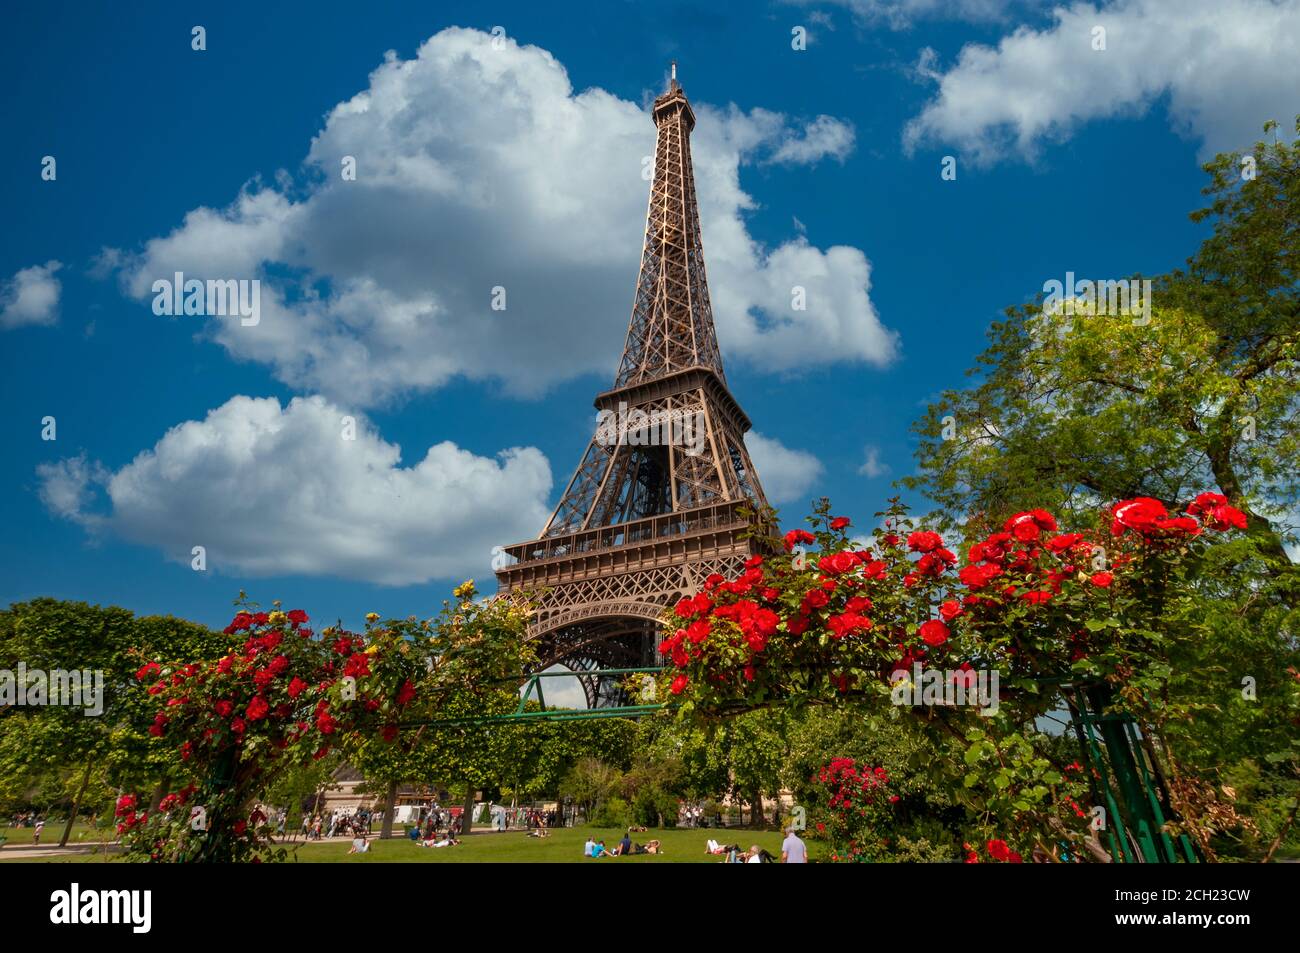 The Eiffel Tower in Paris, France Stock Photo